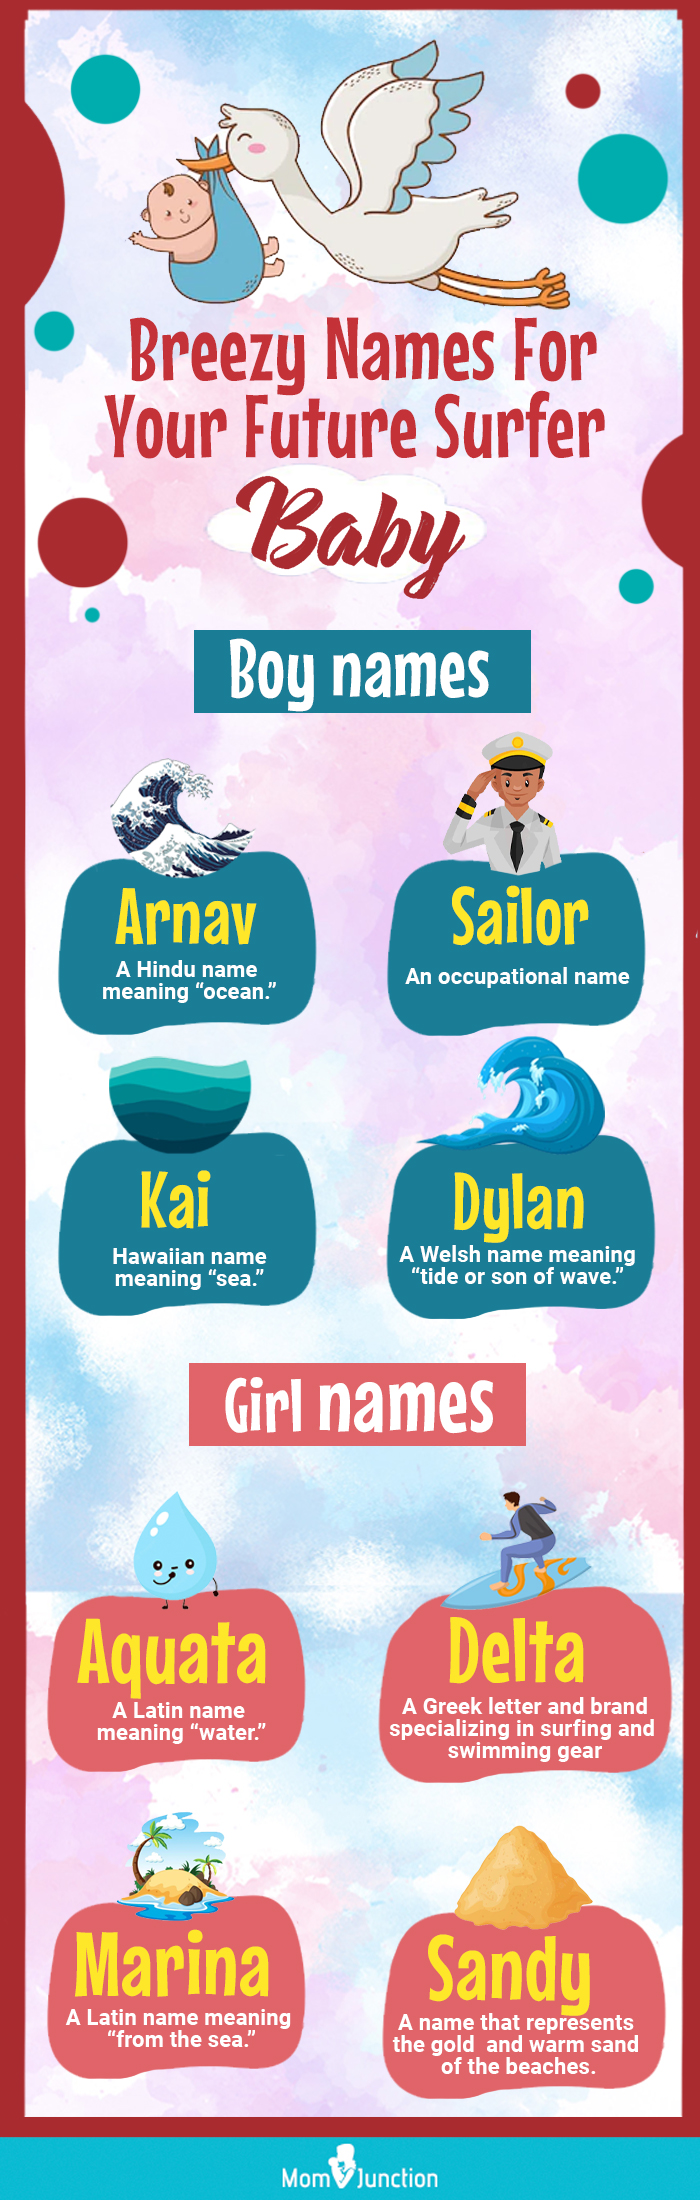 breezy names for your future surfer baby (infographic)